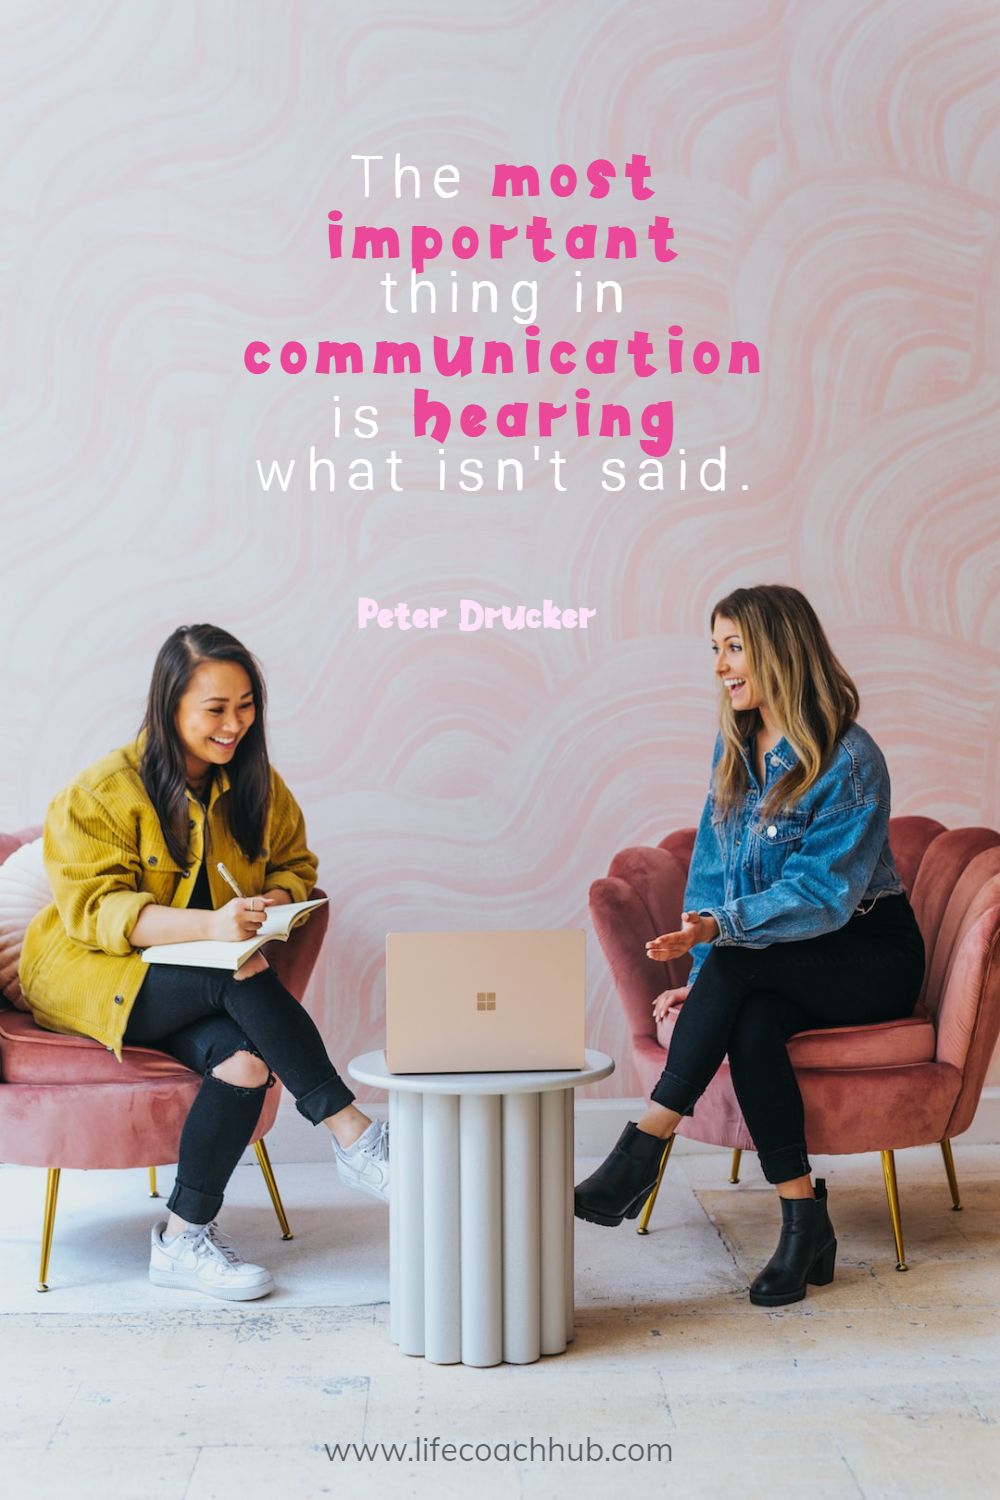 The most important thing in communication is hearing what isn't said. Peter Drucker Coaching Quote